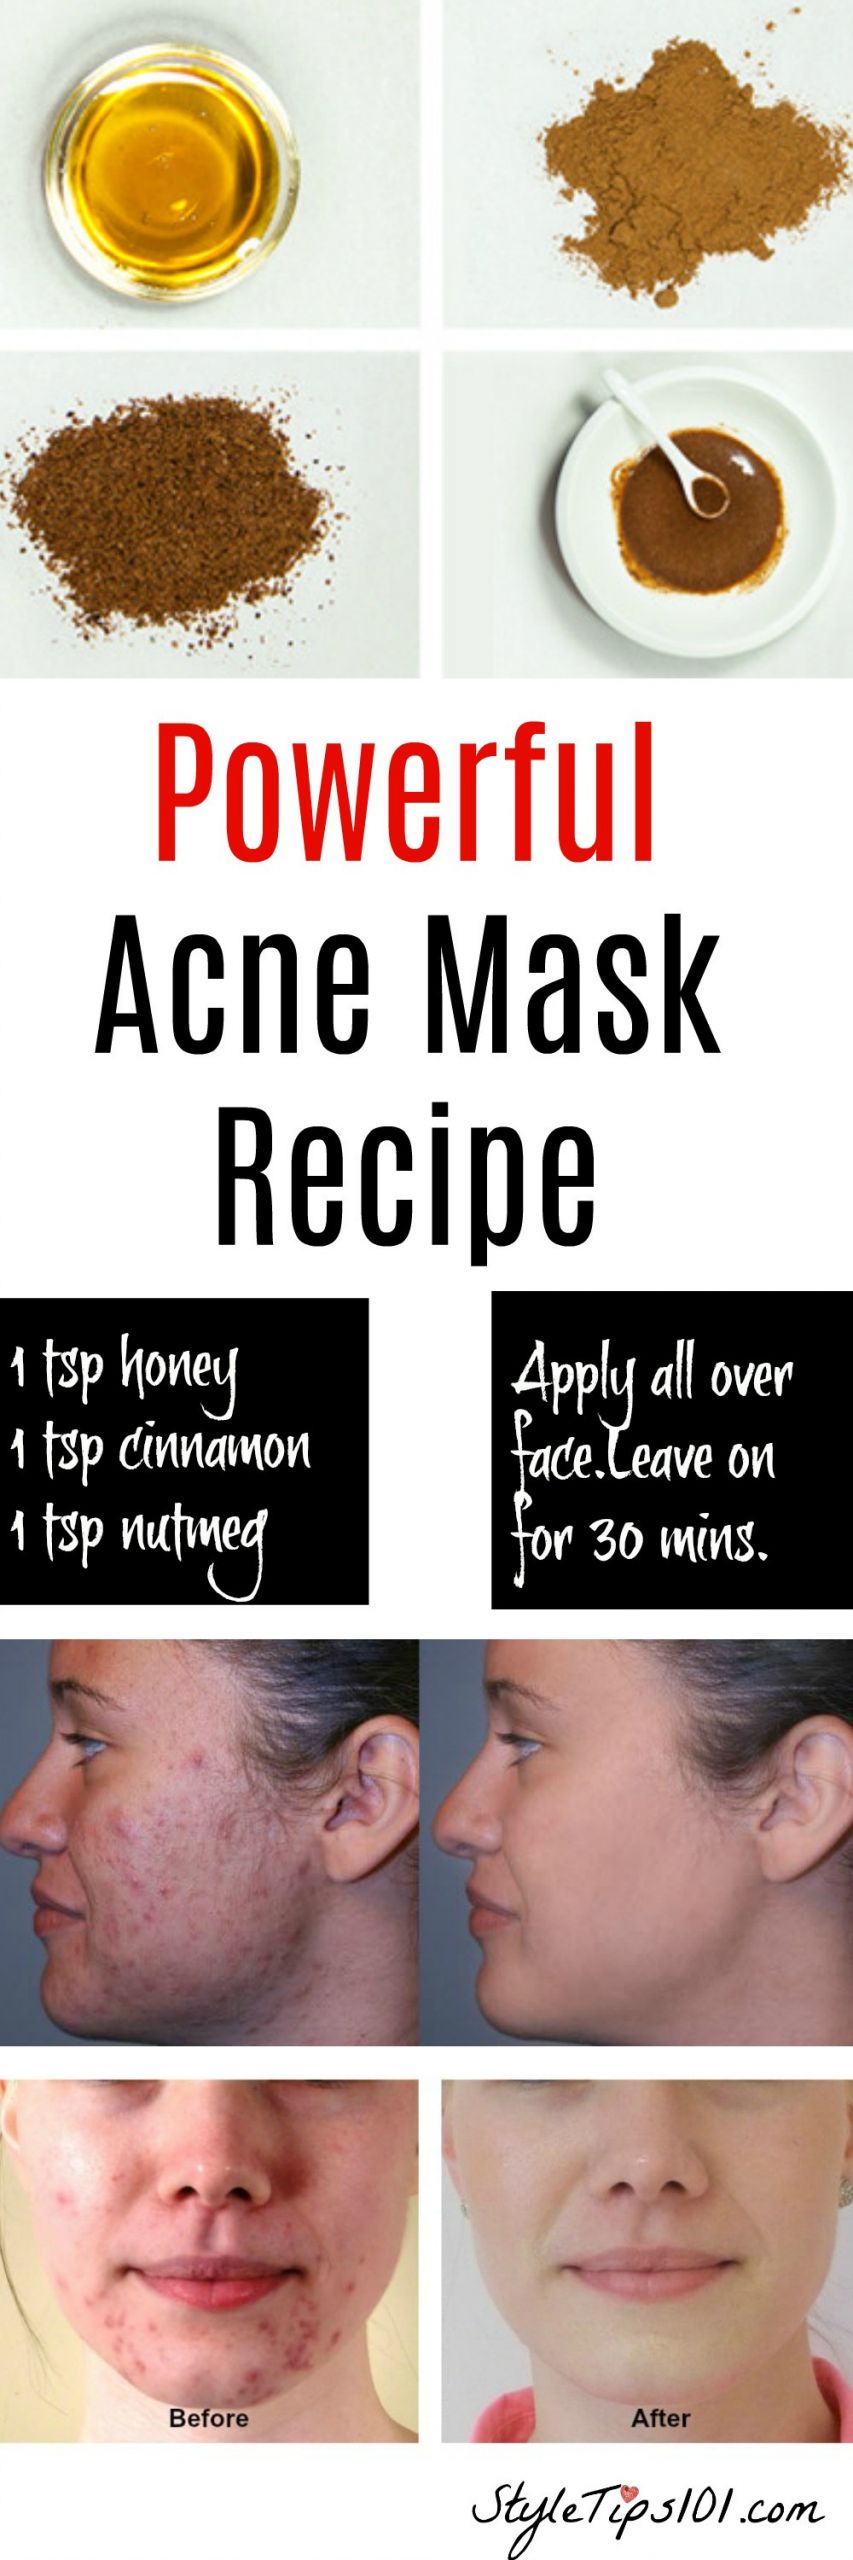 DIY Face Mask To Get Rid Of Acne
 Homemade Natural Acne Mask